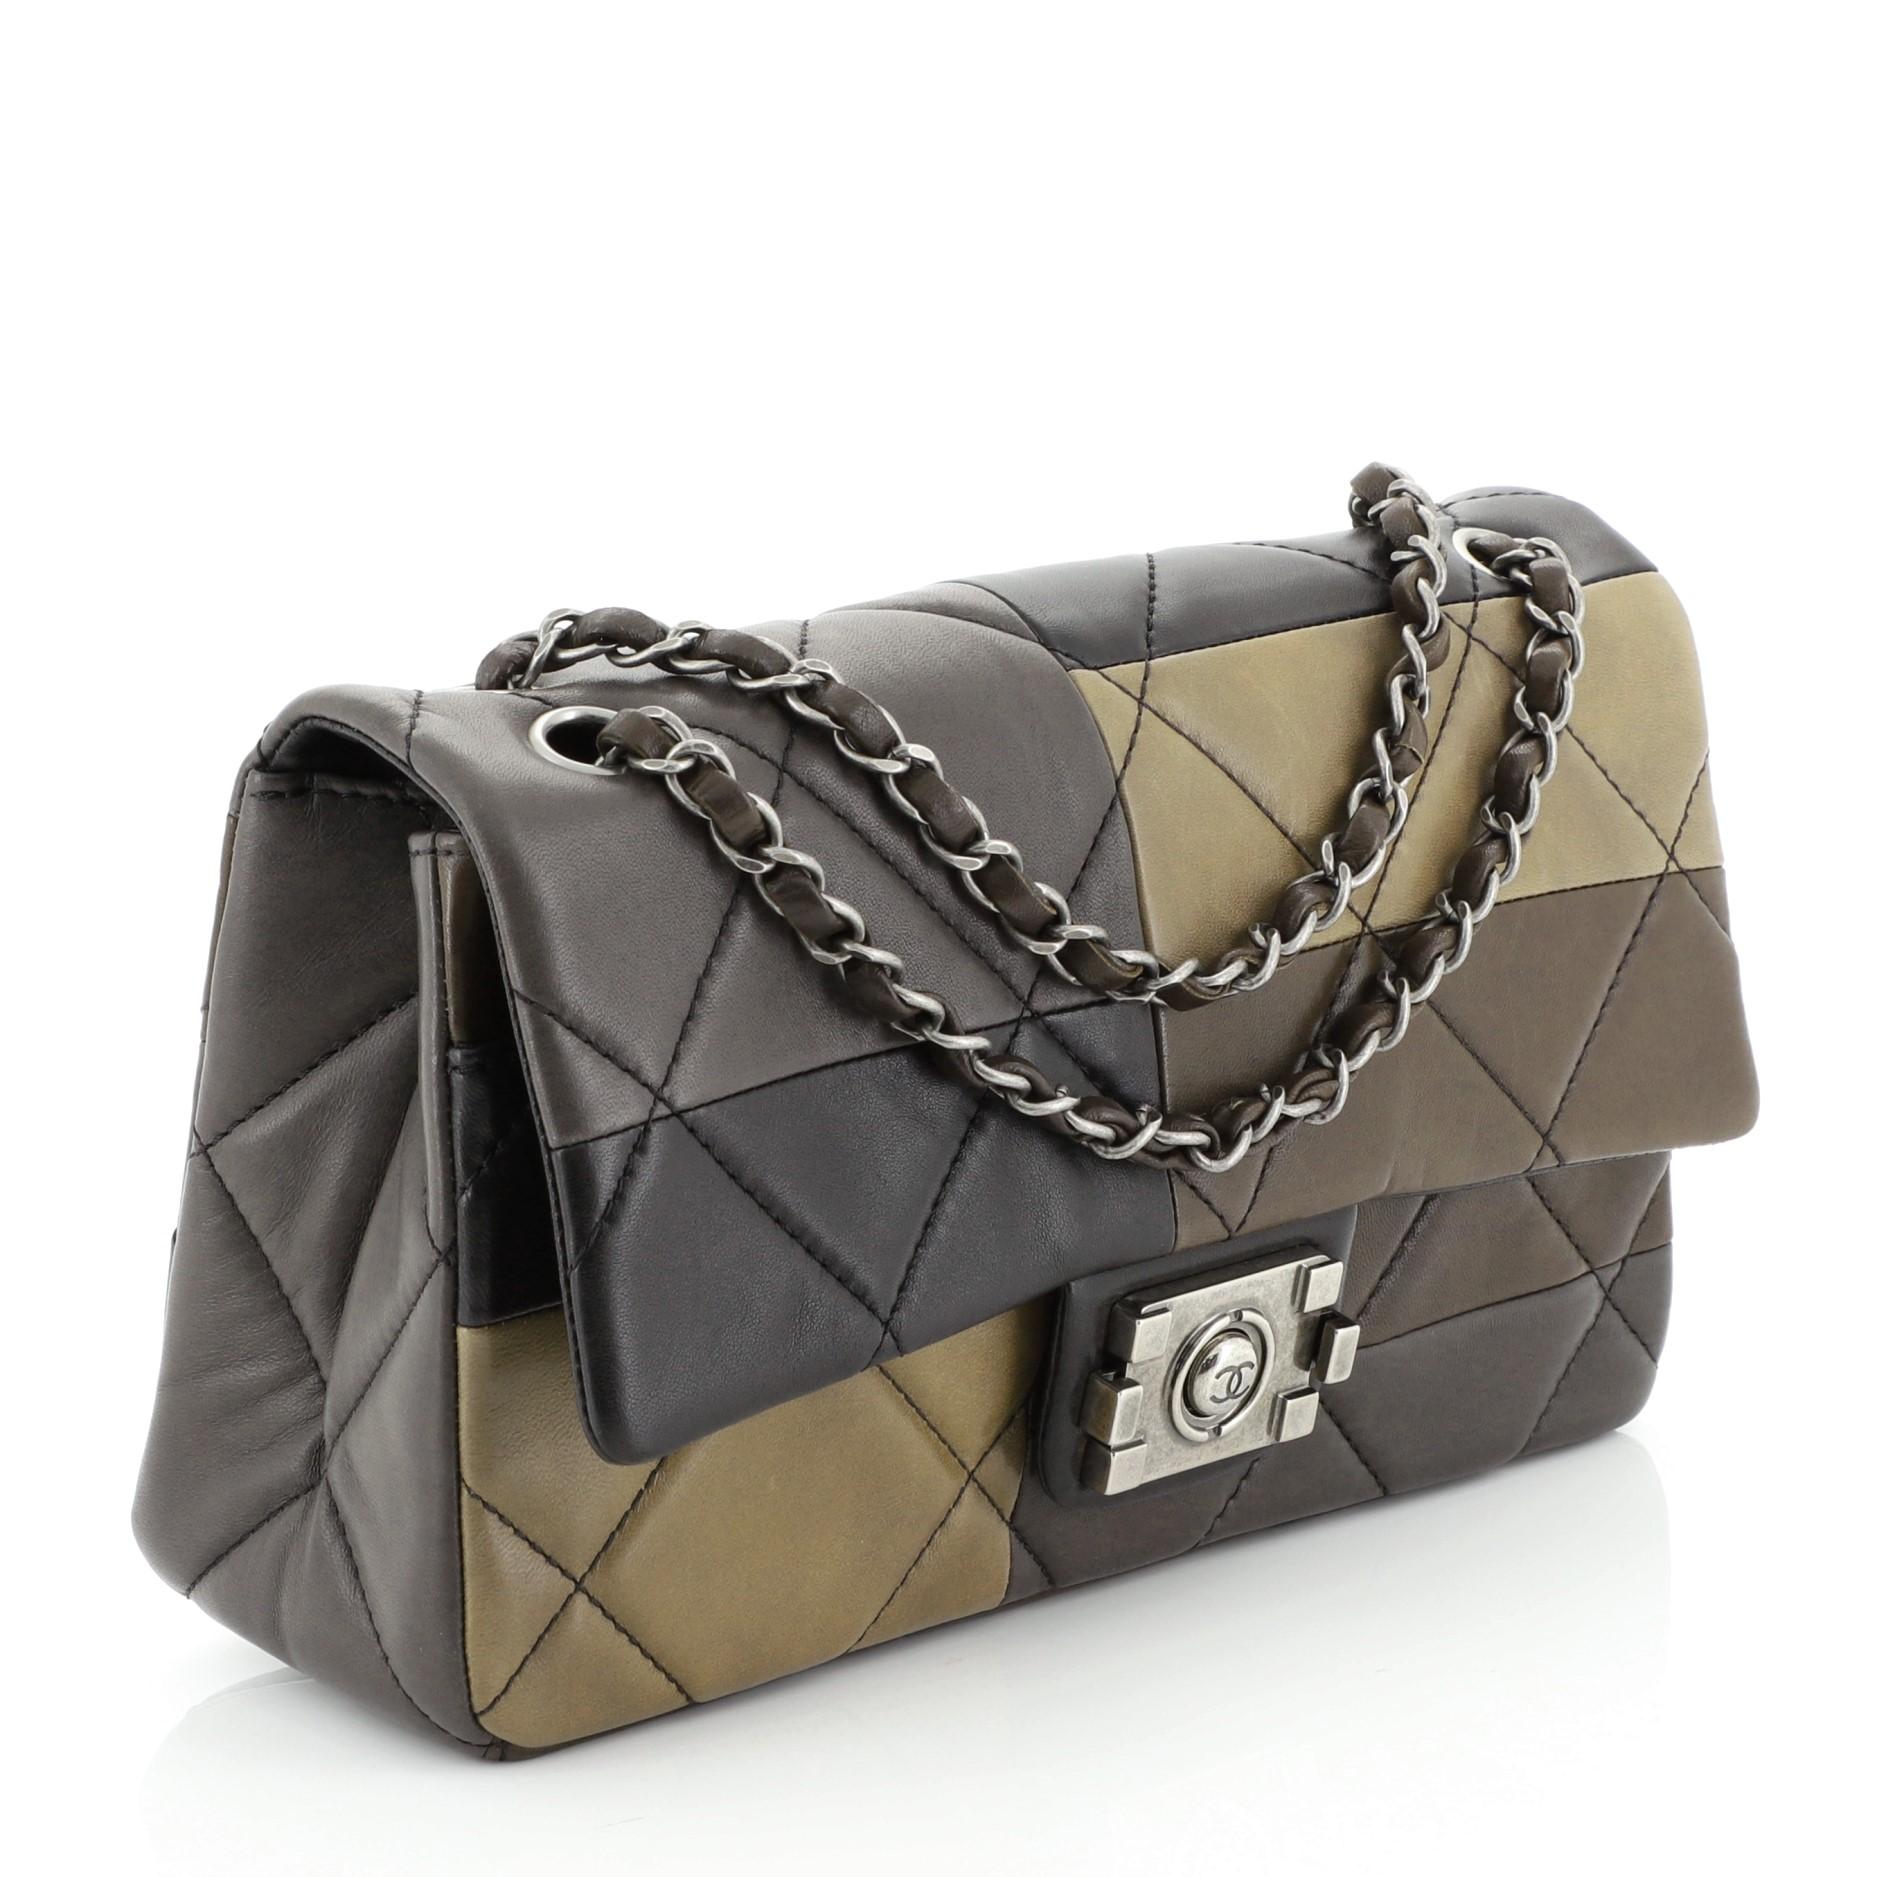 This Chanel Boy Clasp Flap Bag Patchwork Quilted Lambskin Medium, crafted in multicolor quilted lambskin leather, features woven-in leather chain strap, signature Boy clasp closure and aged silver-tone hardware. Its Boy push-lock closure opens to a